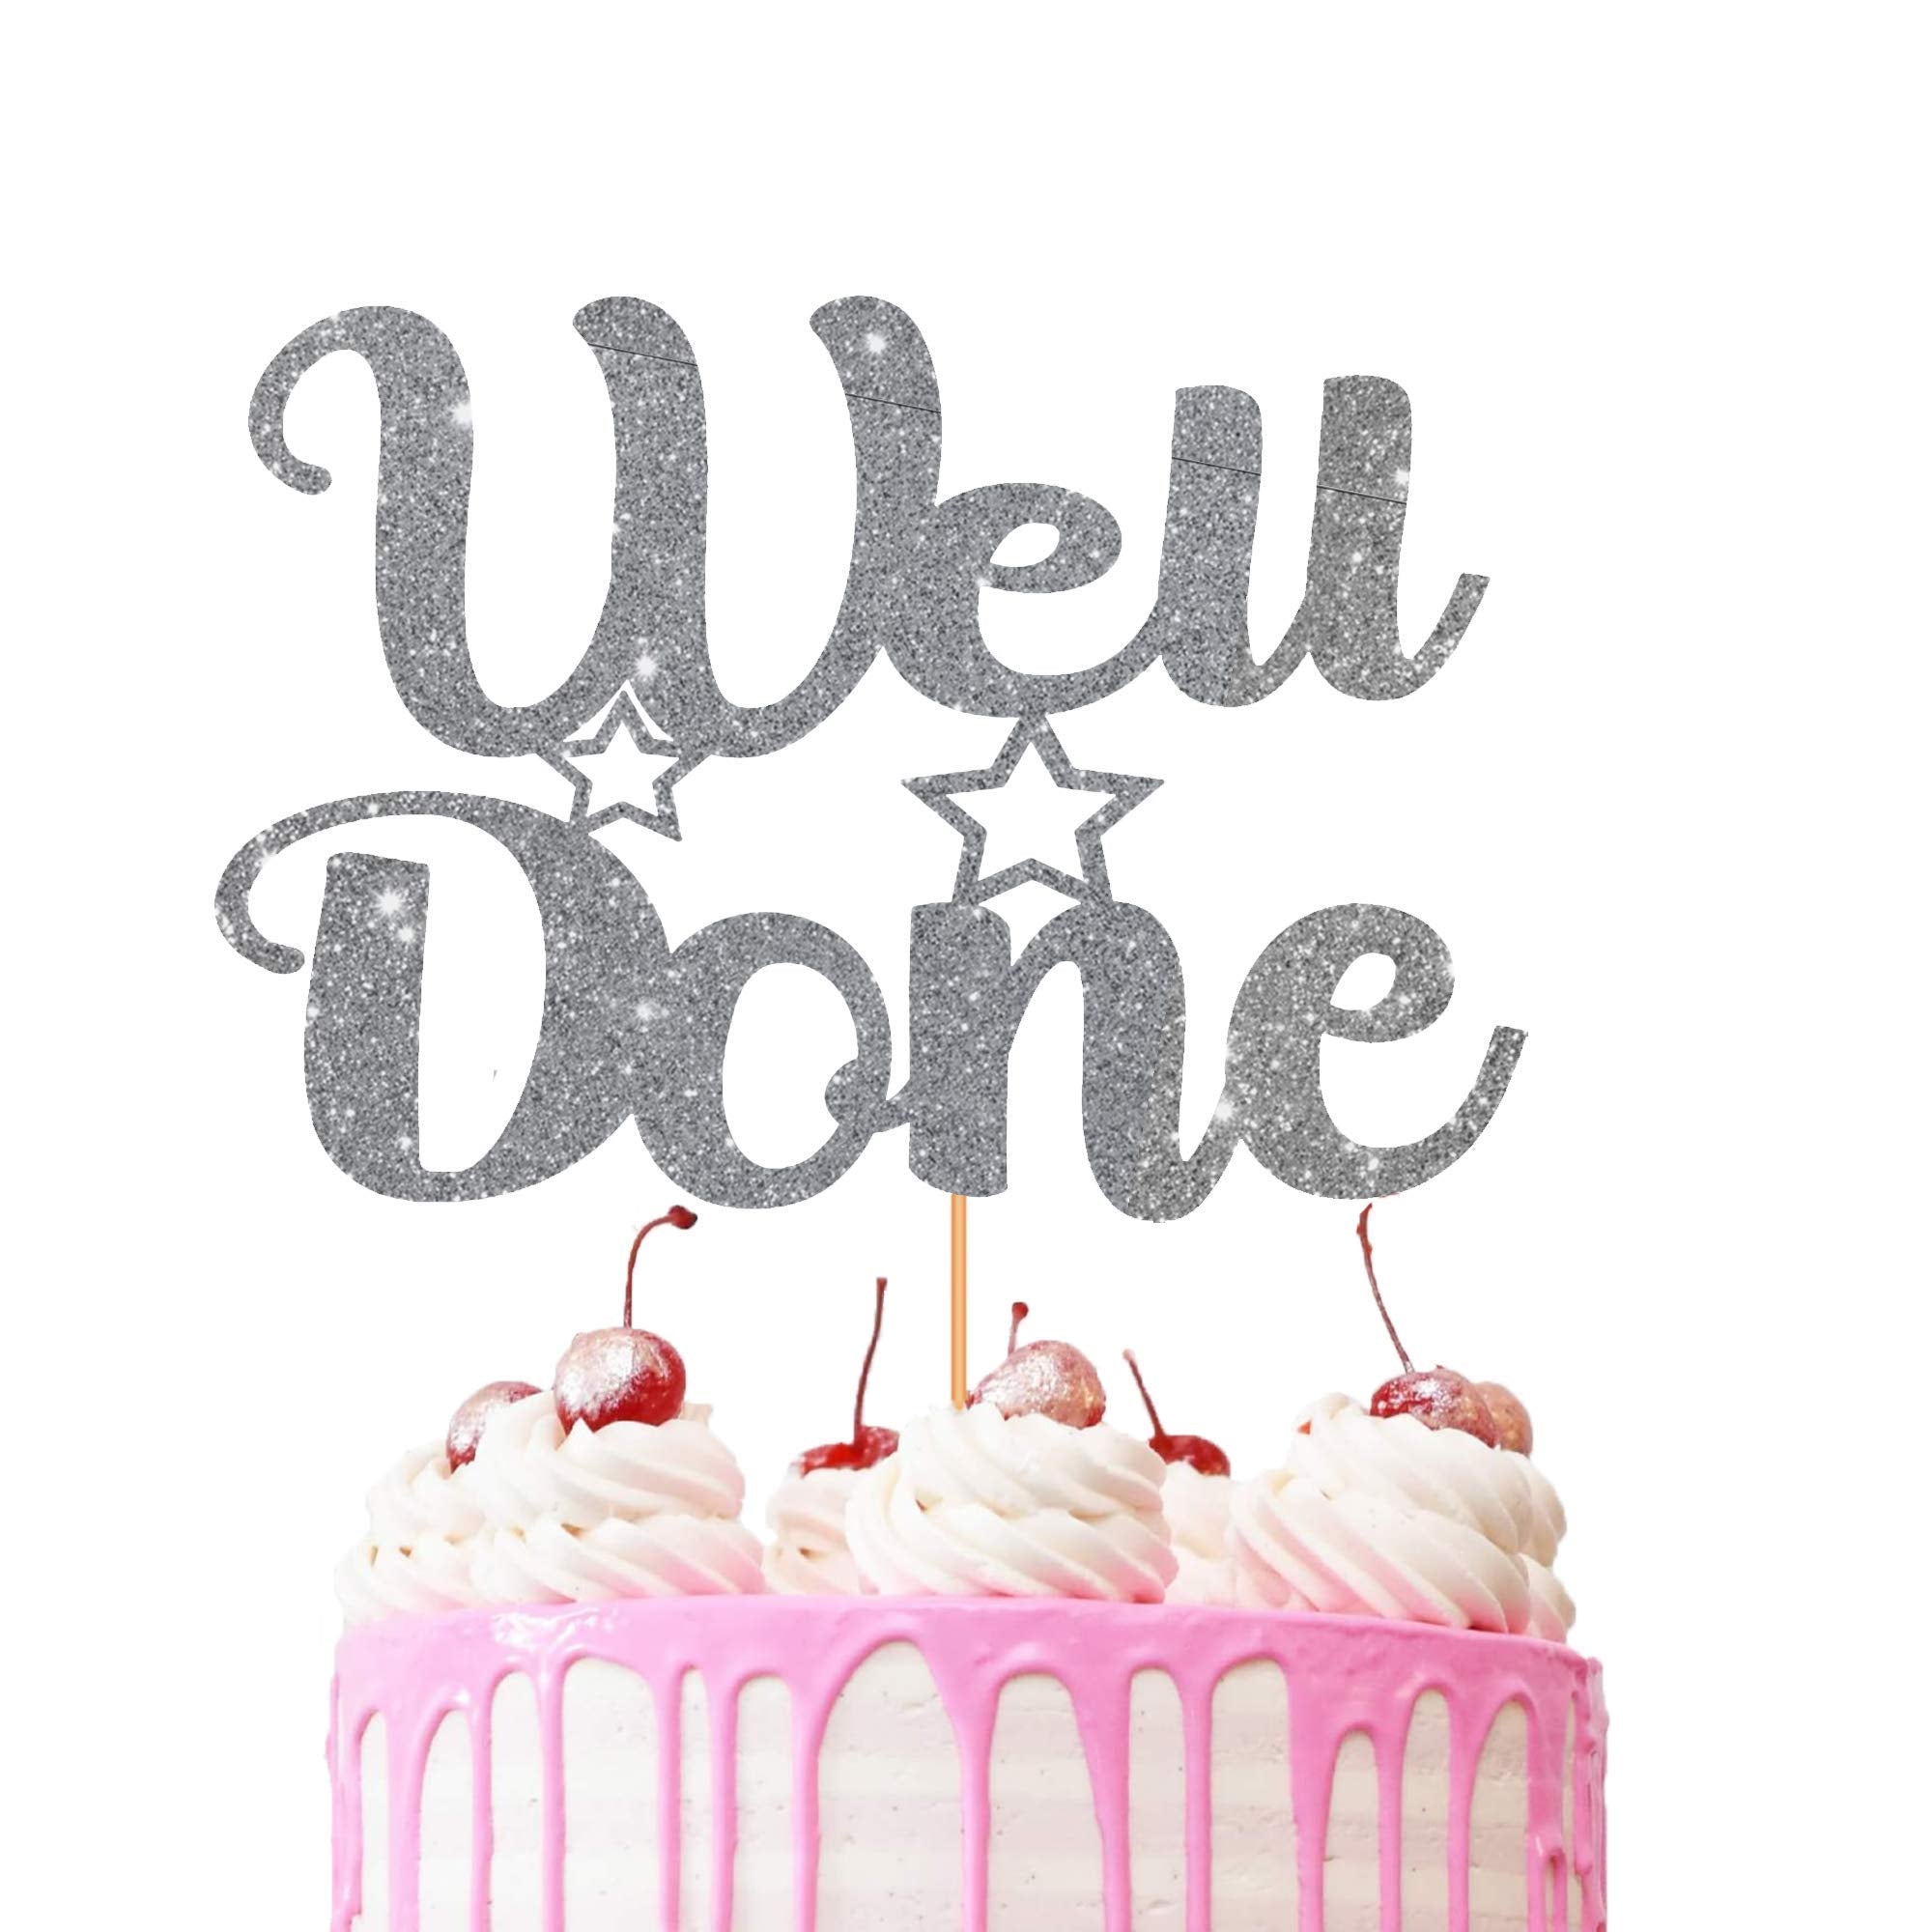 Well Done Cake Topper Glitter Cardstock Party Favour Party Decoration Cake Toppers (Silver)